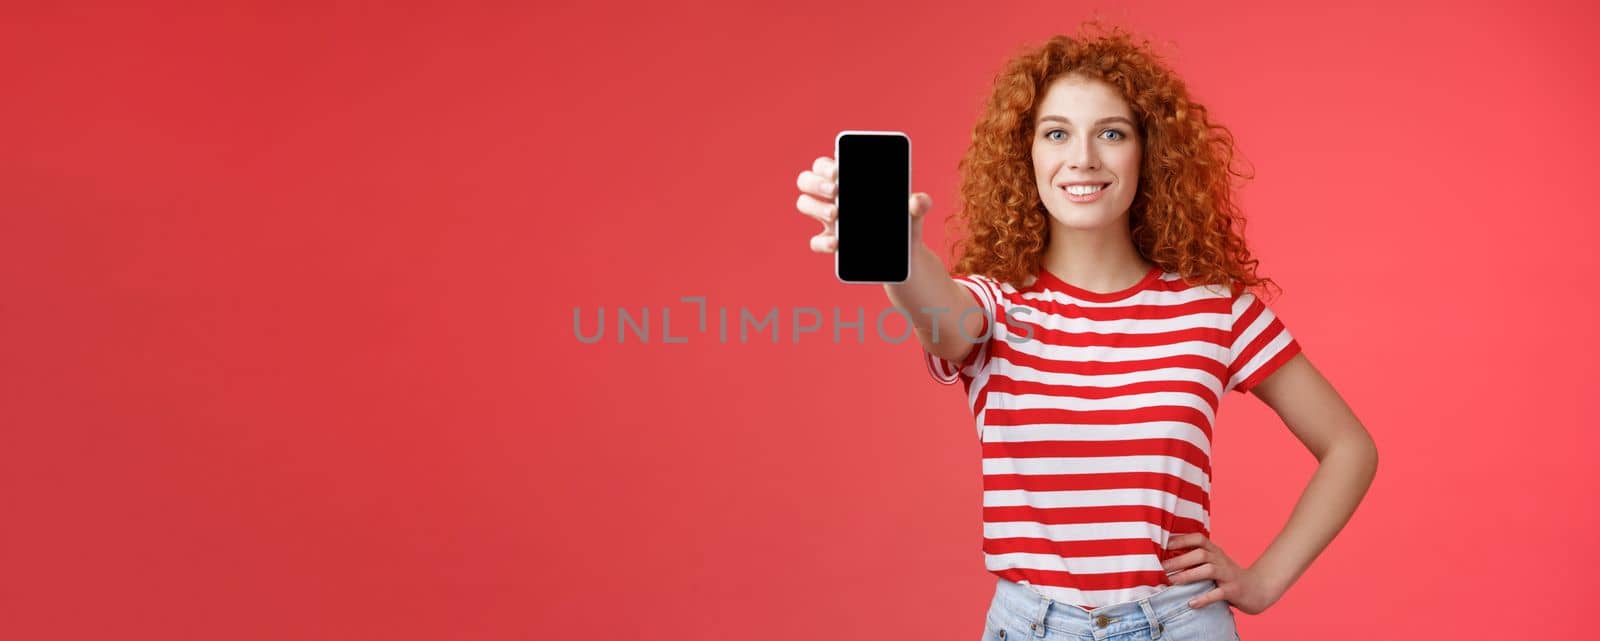 Confident good-looking redhead curly woman present cool app hold smartphone extended hand show phone screen smiling assertive recommending subscribe her blog social-media. Copy space